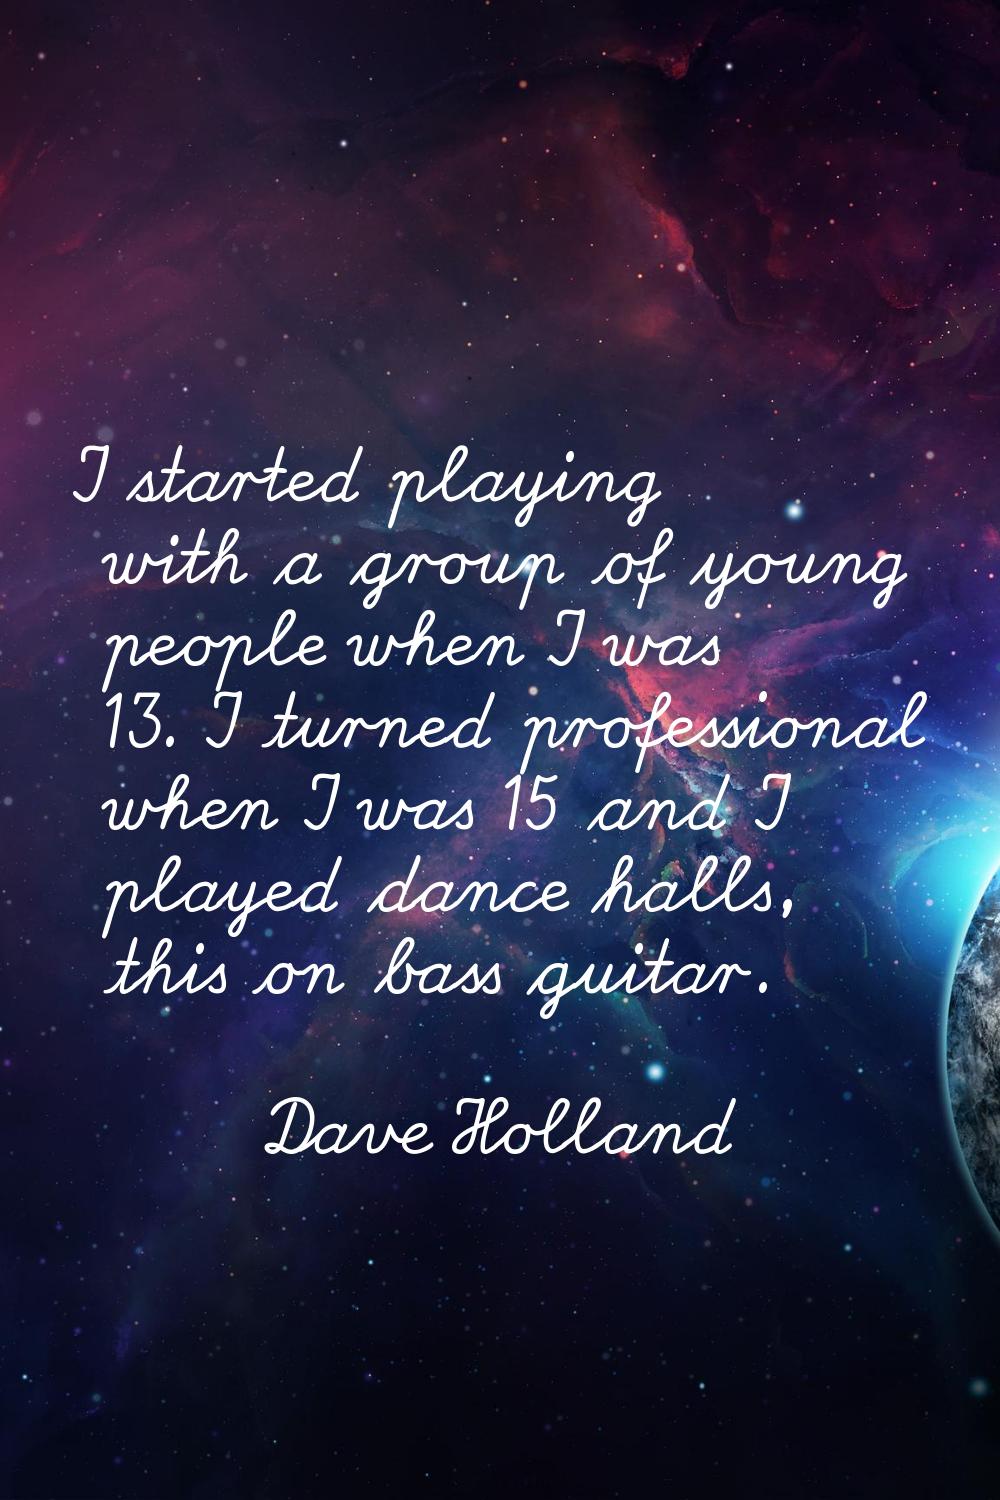 I started playing with a group of young people when I was 13. I turned professional when I was 15 a